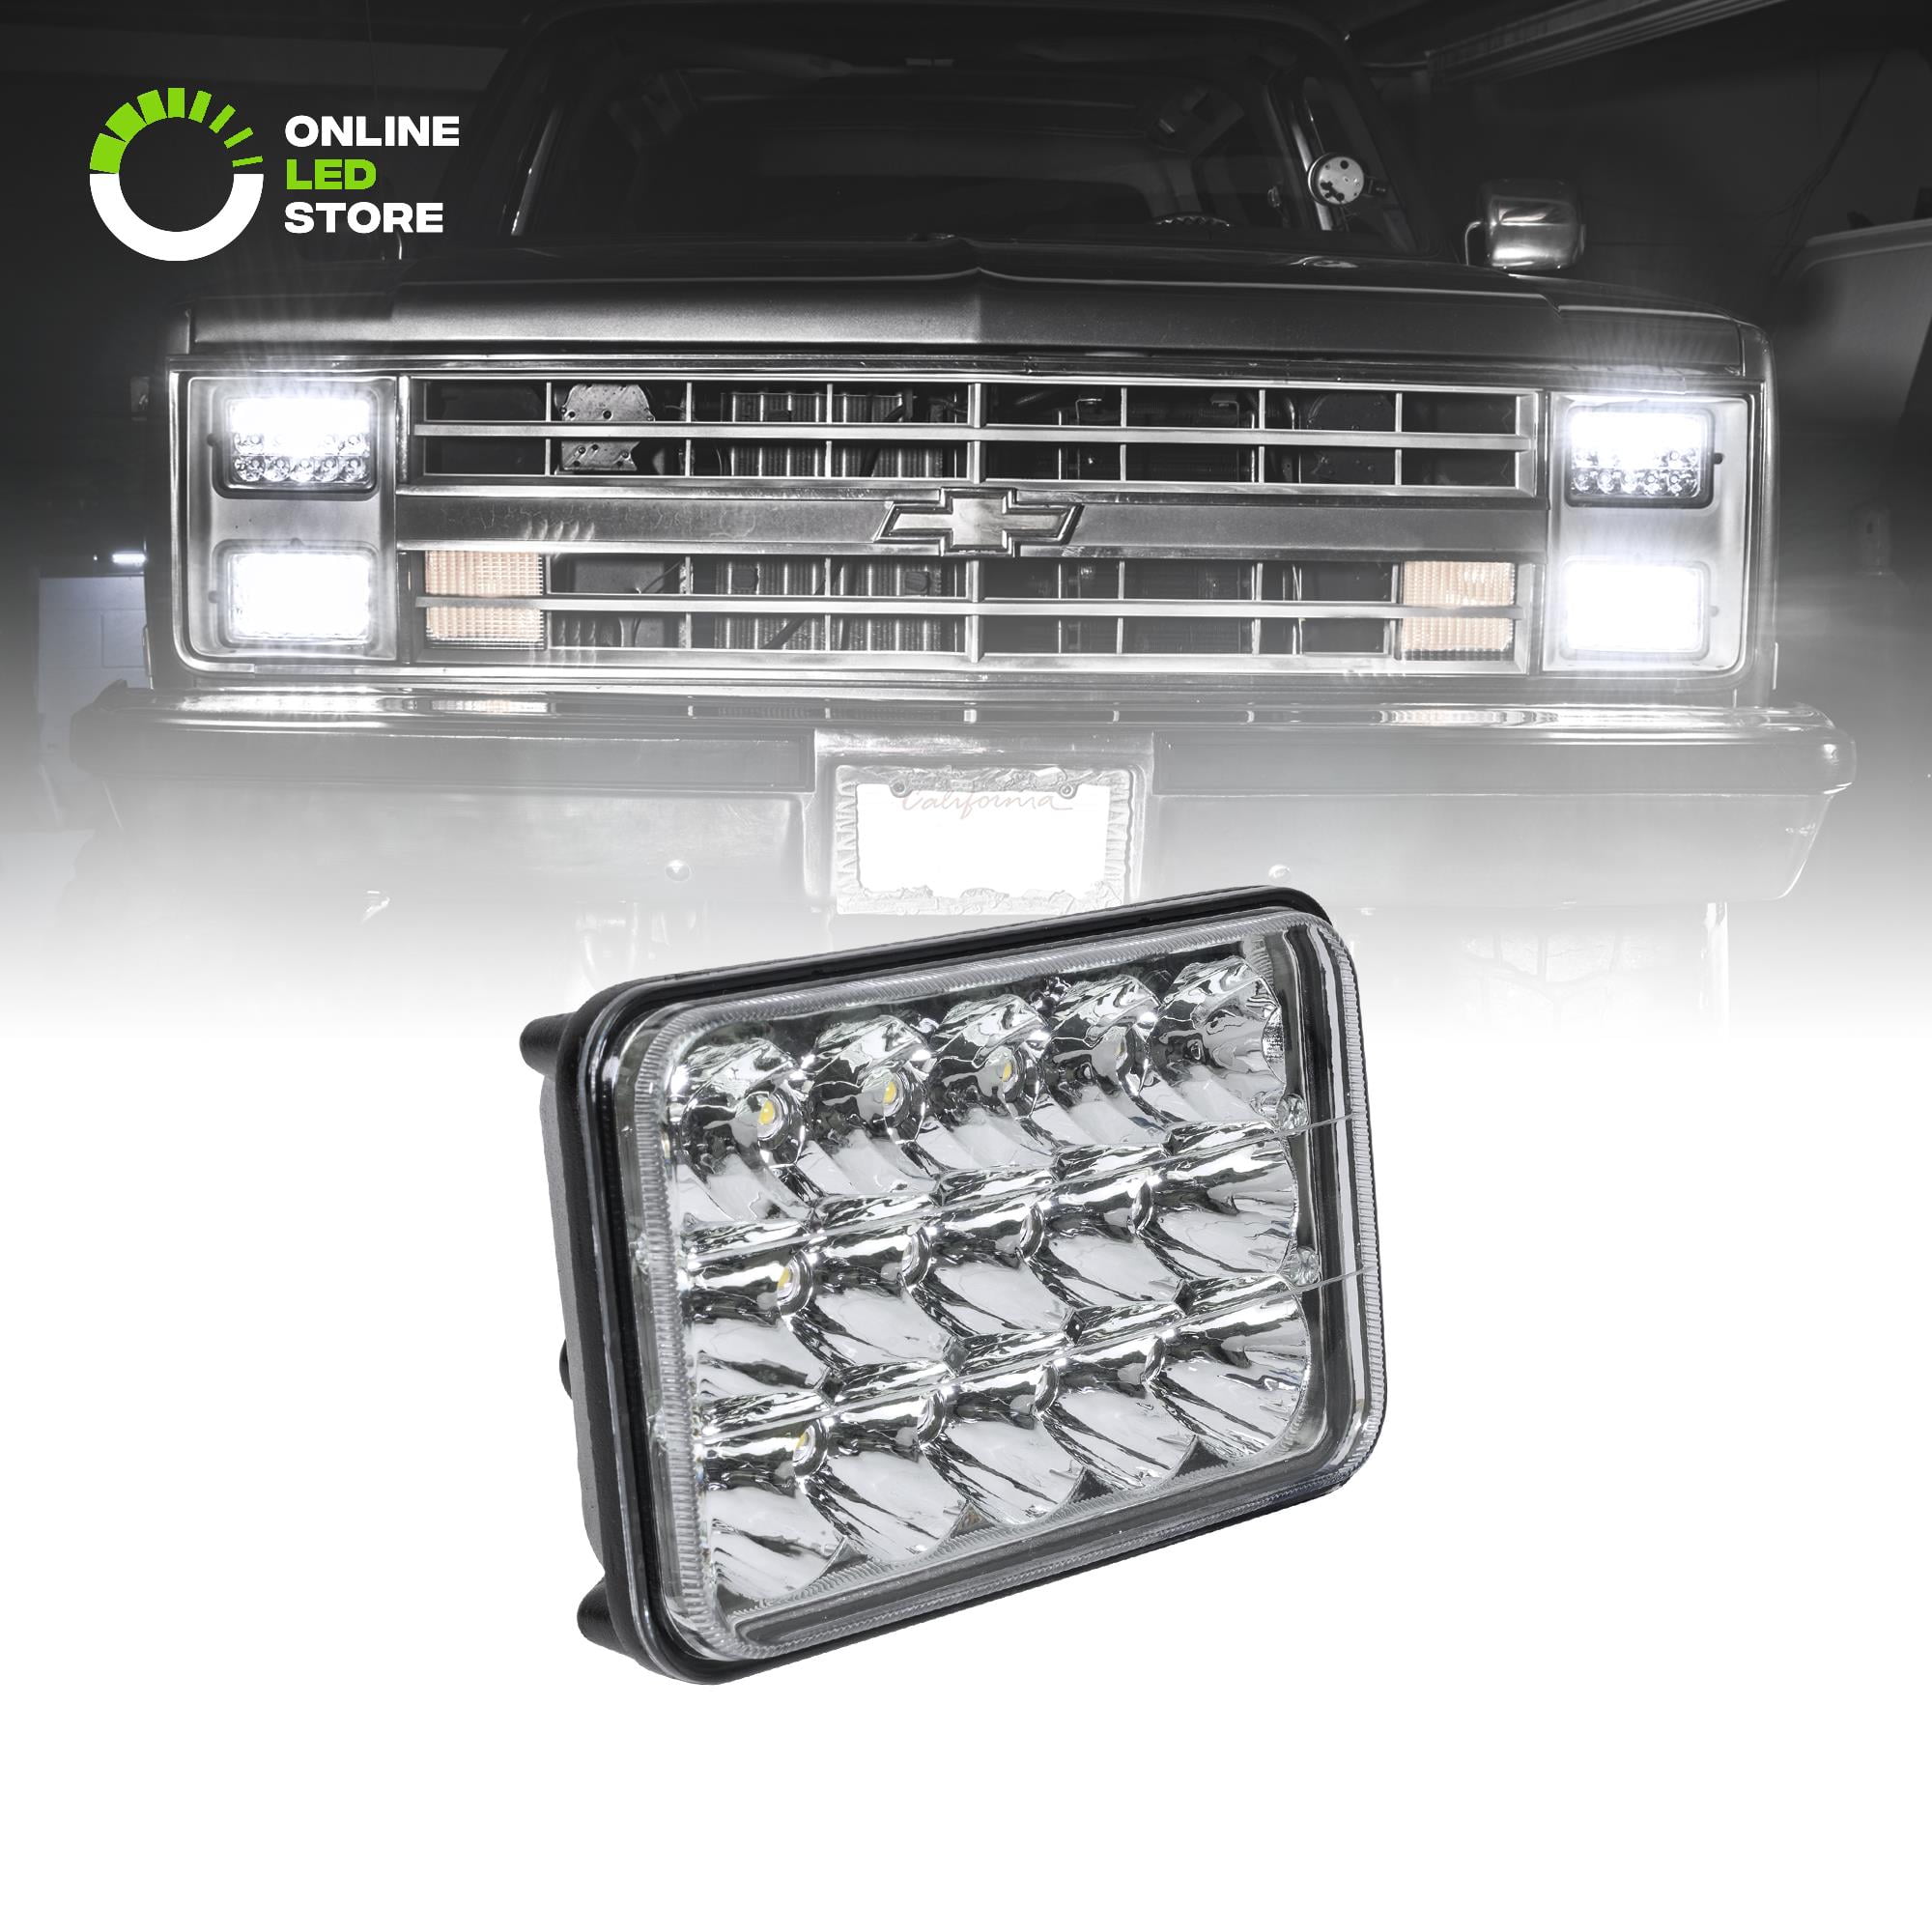 TRUCKMALL 4x6 inch LED Headlights Set Kit Lights Lamps Accessories Compatible with H4651 H4652 H4656 H4666 H6545 for Peterbil Kenworth Freightinger Ford Probe Chevrolet Oldsmobile Cutlass Chrome 4PCS Ubuymore